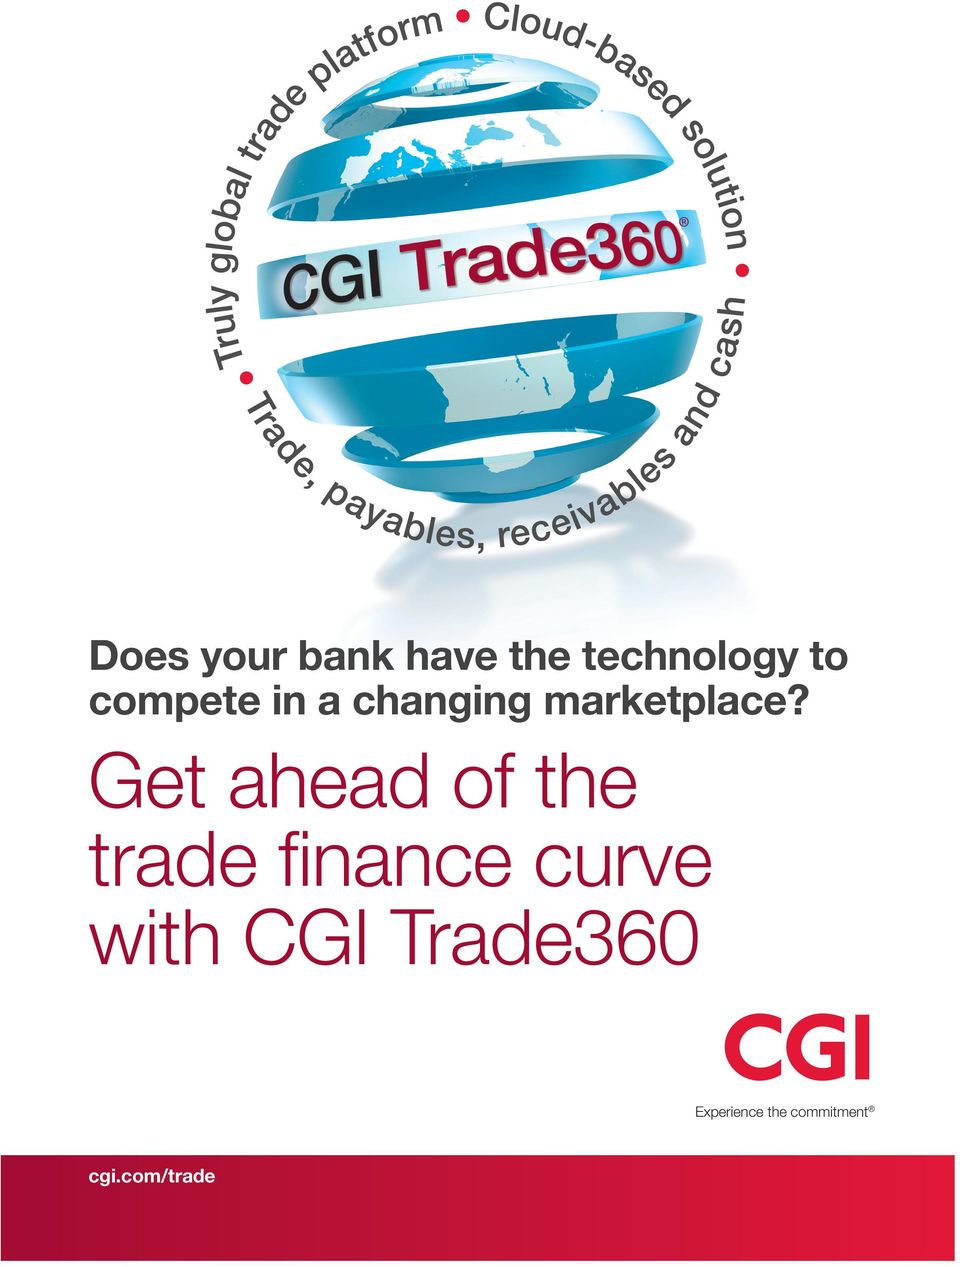 Get ahead of the trade finance curve with